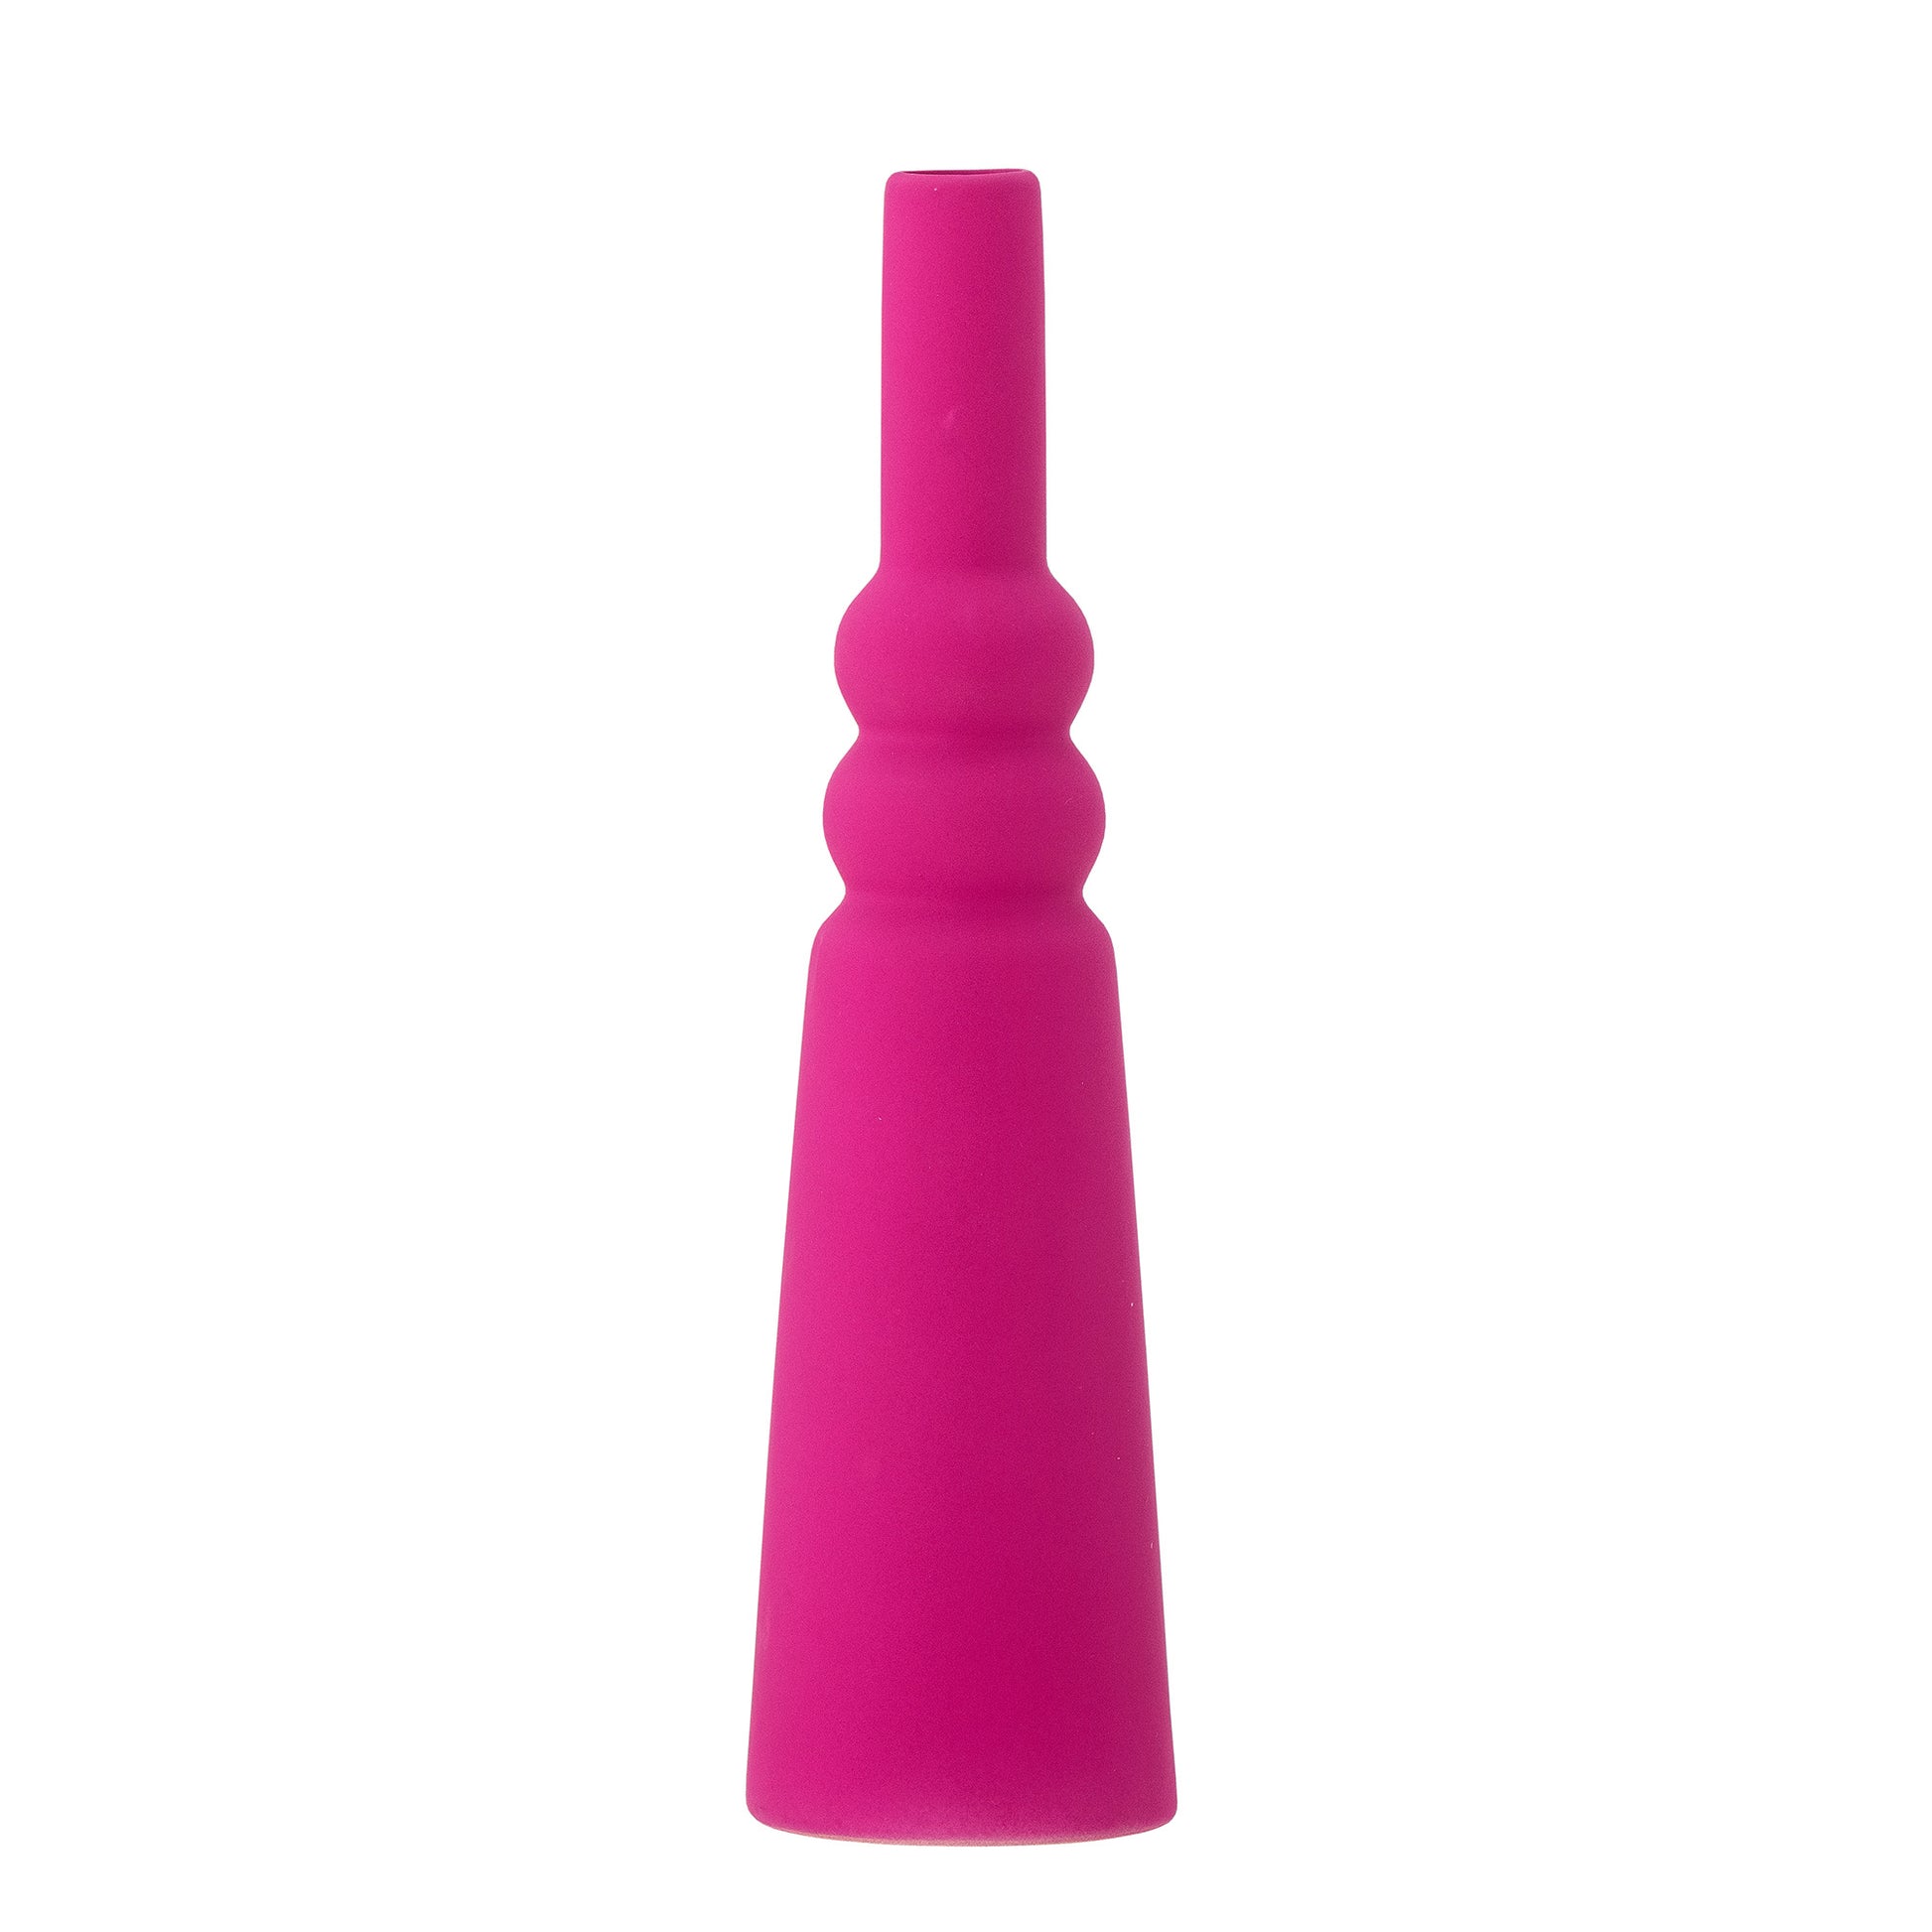 A bright pint slimline vase with a soft feel finish. A colour pop to brighten any space.